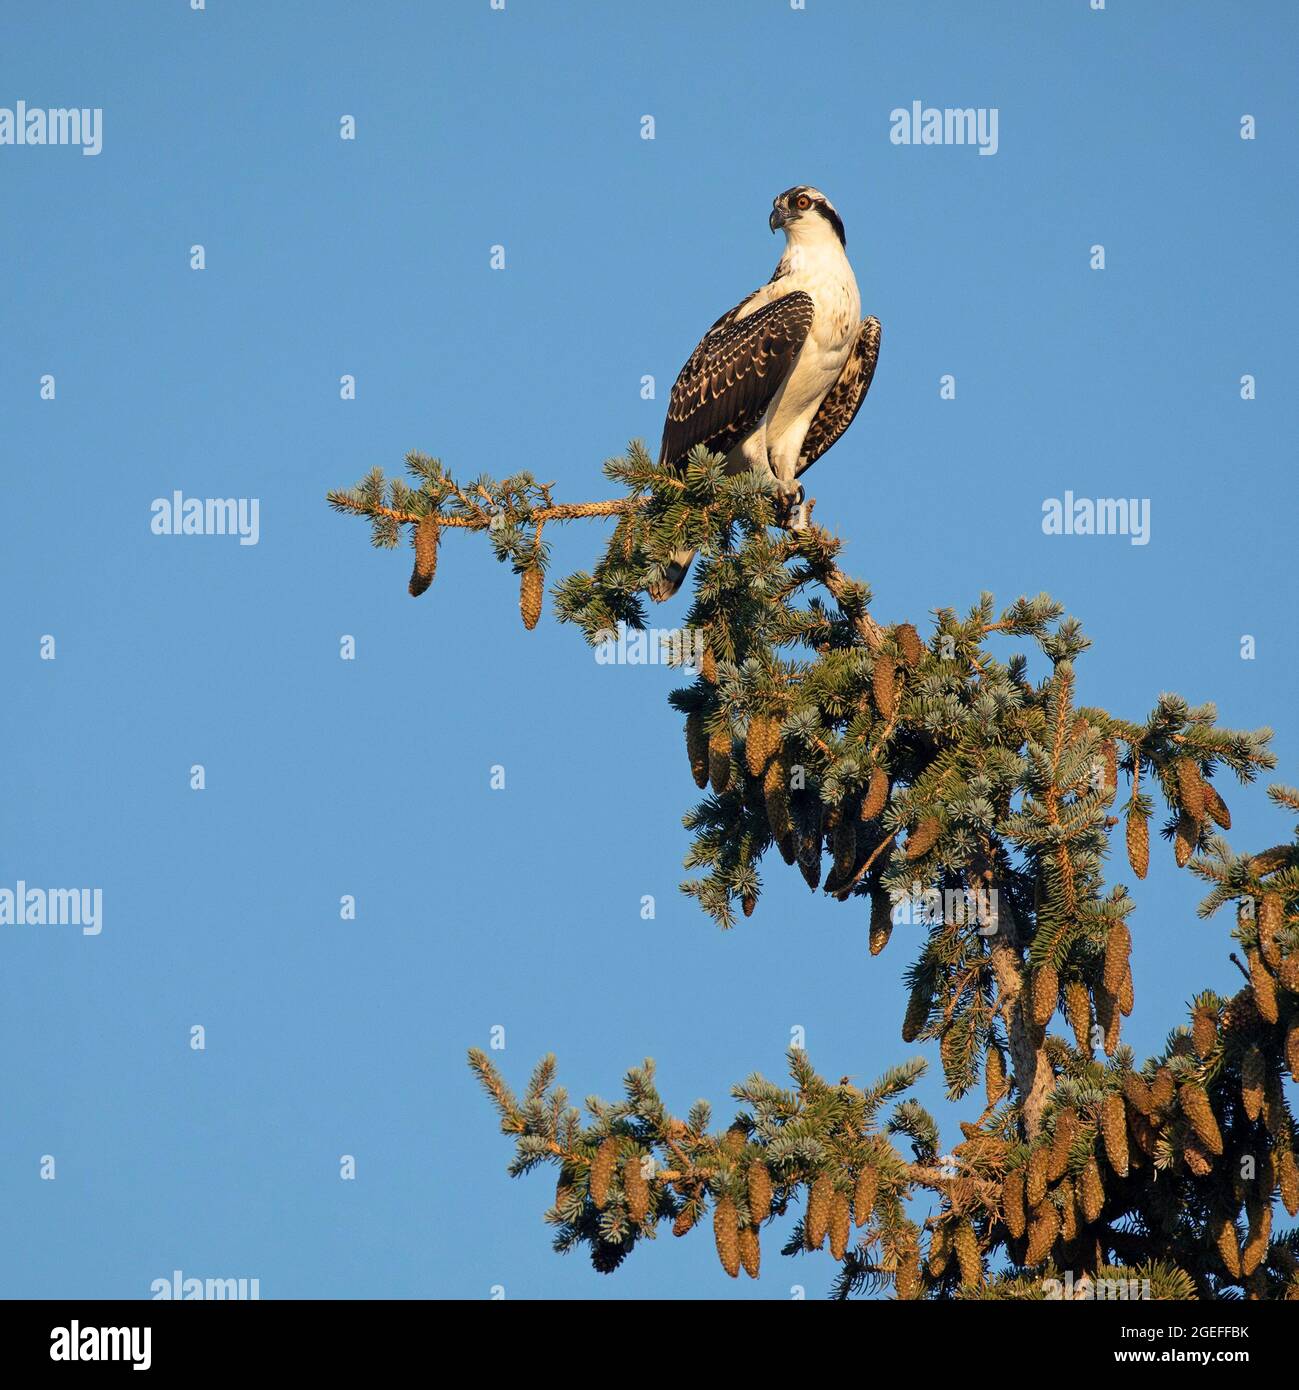 Juvenile osprey perched at top of spruce tree with blue sky in Alberta, Canada Stock Photo